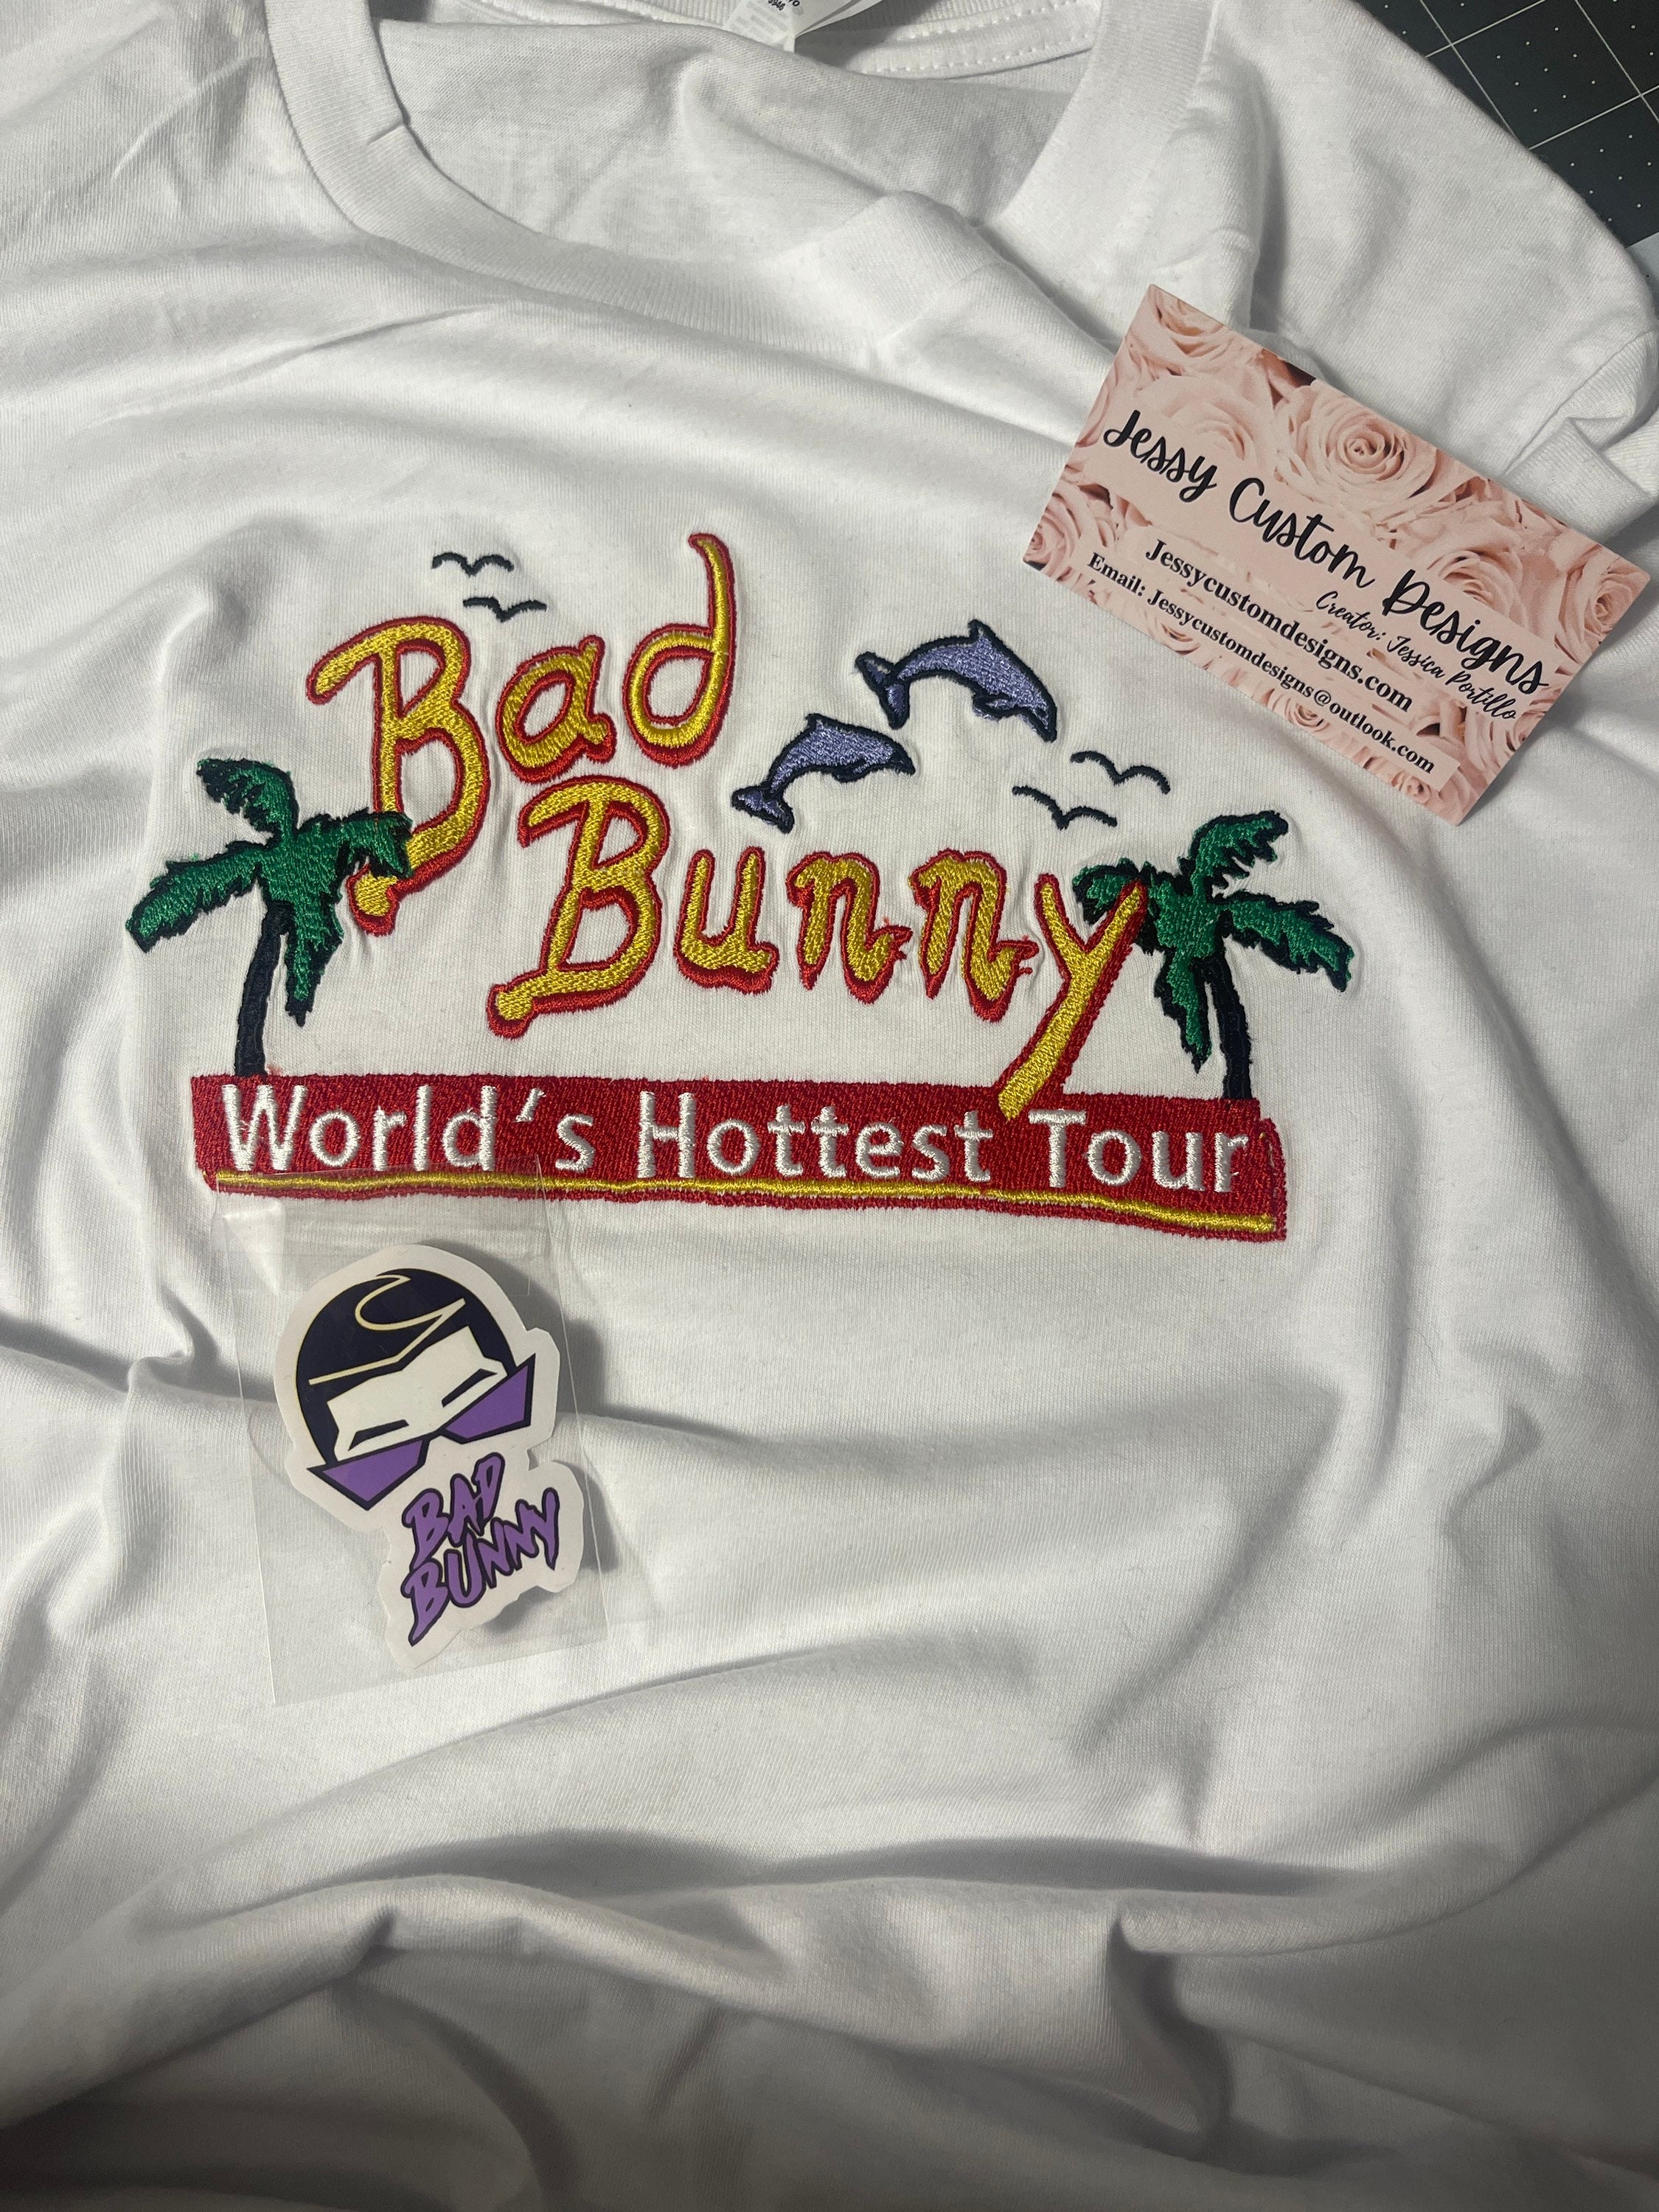 Bad Bunny Outfit Ideas World's Hottest Tour Stadiums 2022 Shirts